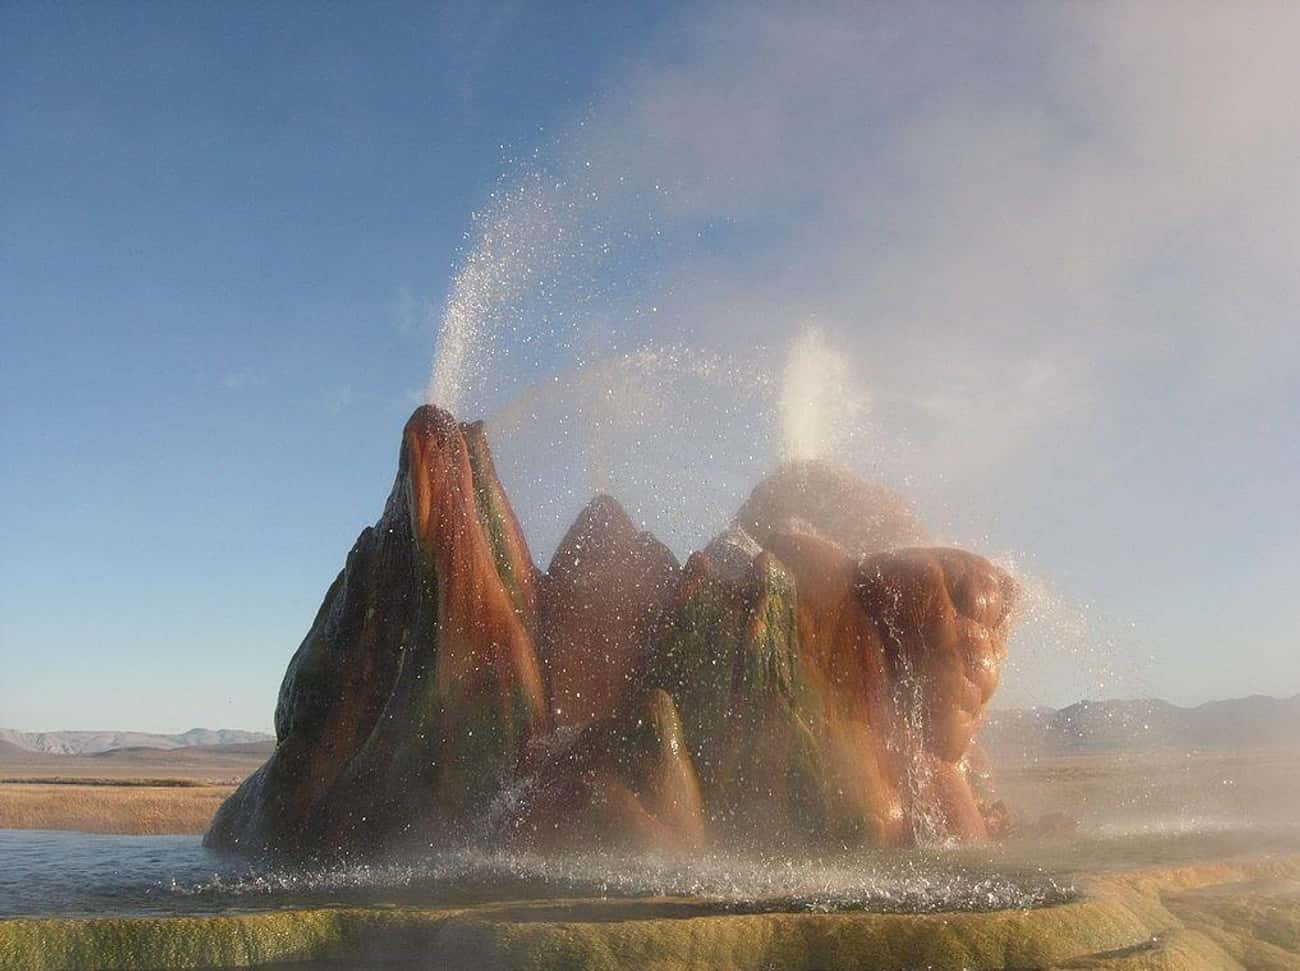 Fly Geyser Sports Multiple Spouts, A Unique Feature Among Geysers